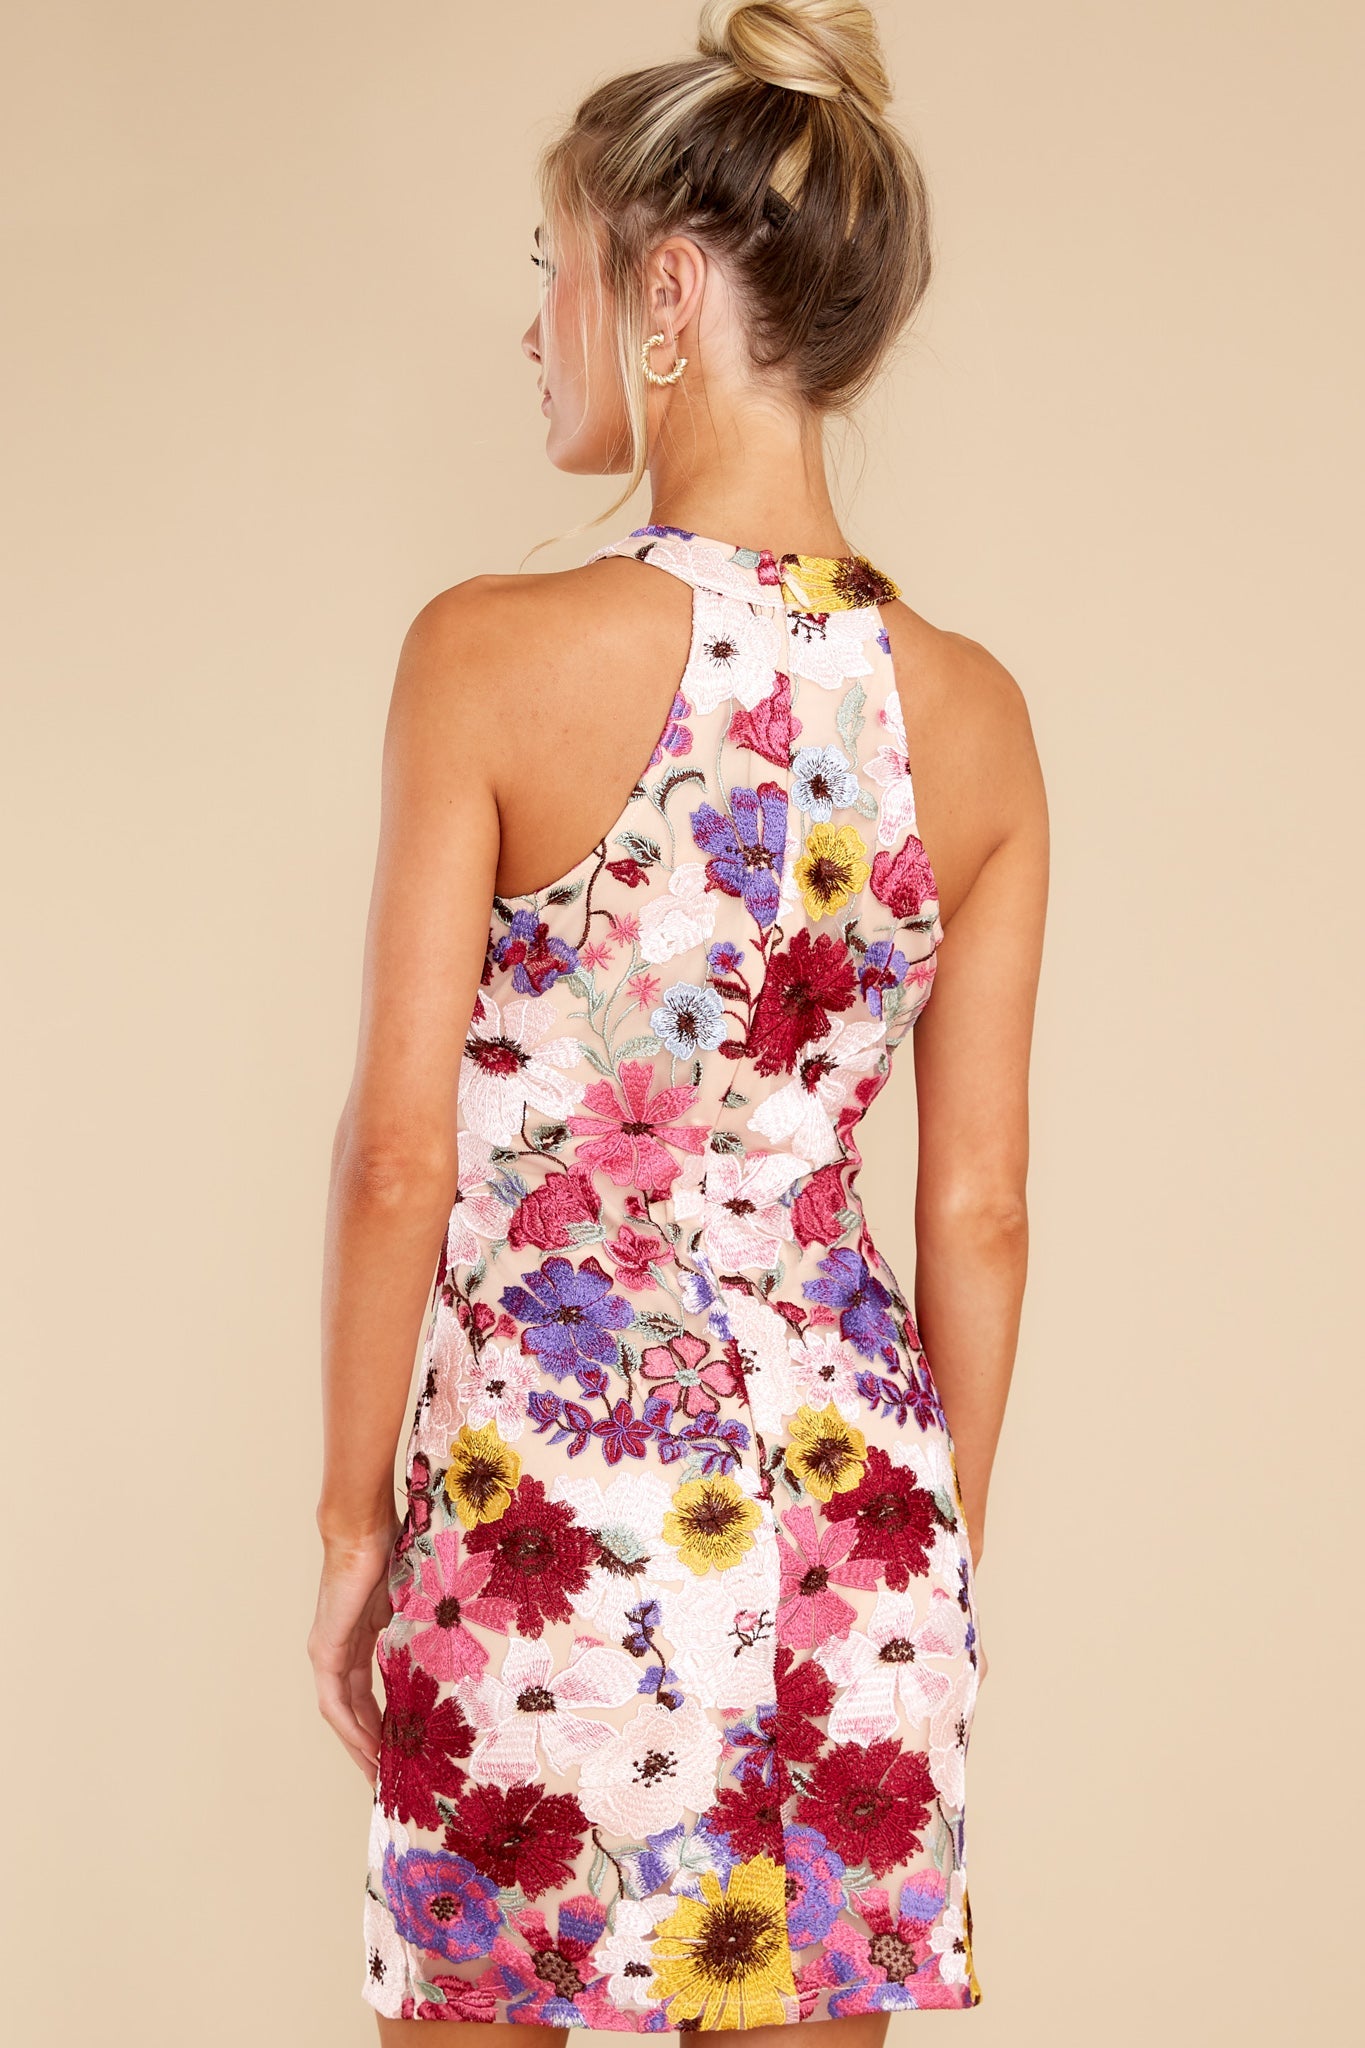 Back view of this dress that features a halter neckline, a hidden zipper down the back, and stitched flower detailing throughout.